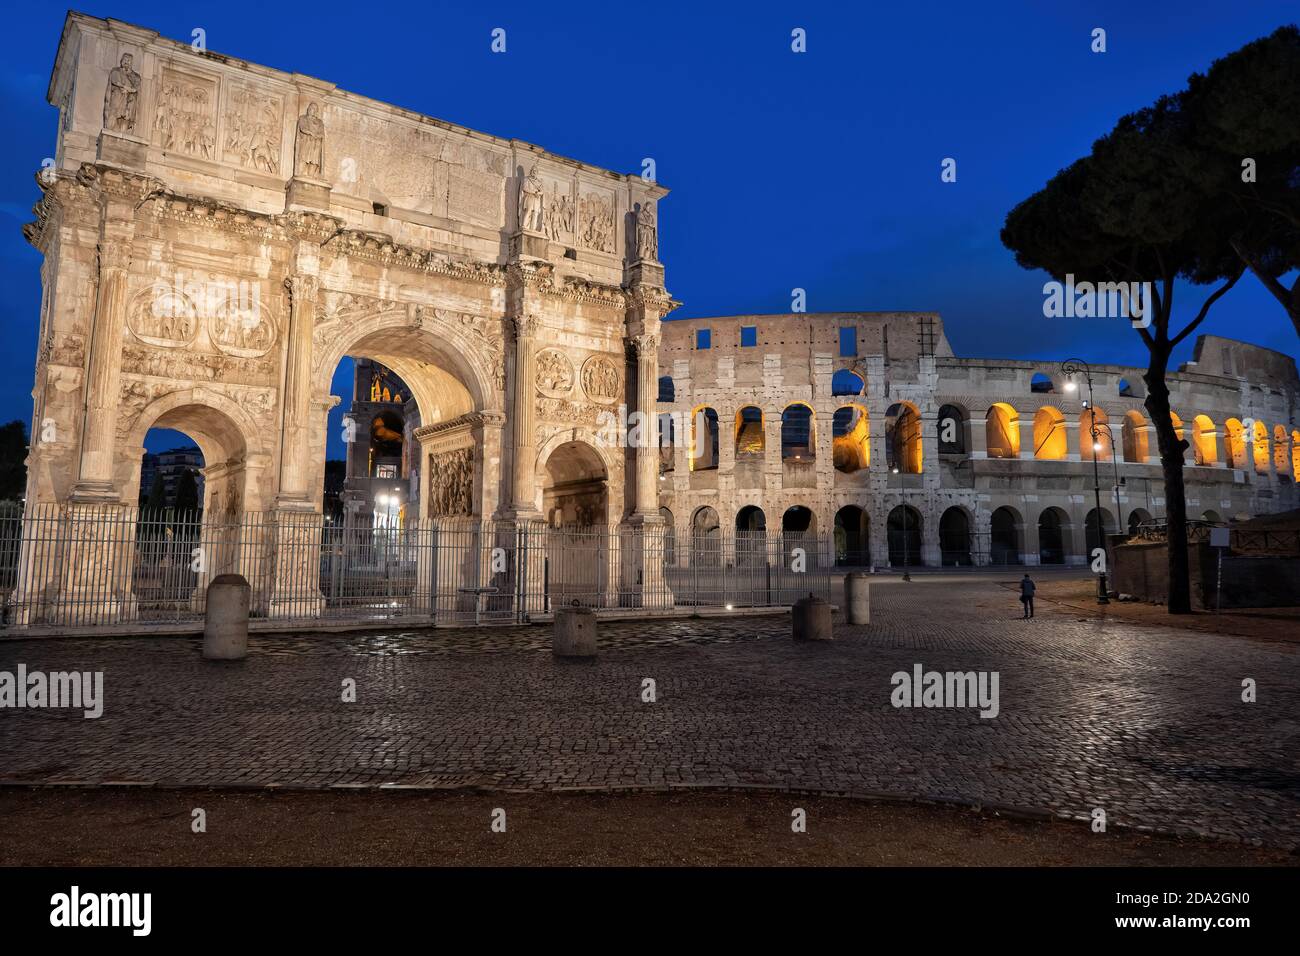 Arch of Constantine and Colosseum at night in Rome, Italy. Ancient city landmarks from Piazza del Arco di Costantino square. Stock Photo